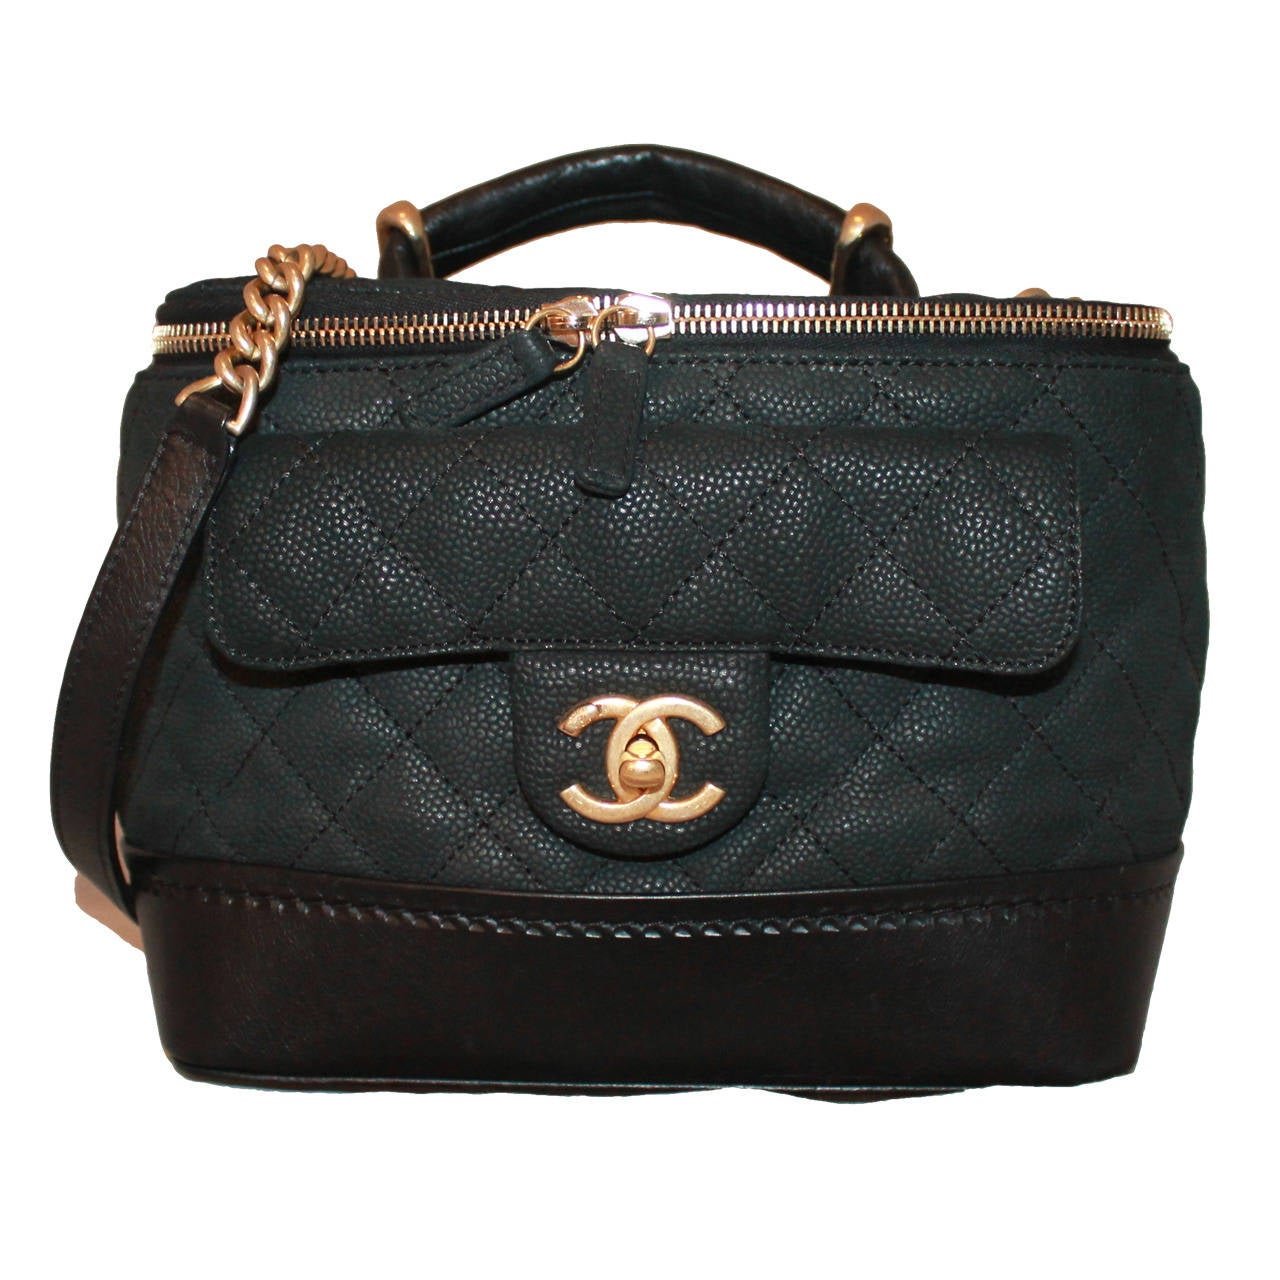 Chanel Black Leather Quilted Globe Trotter Handbag - circa 2014